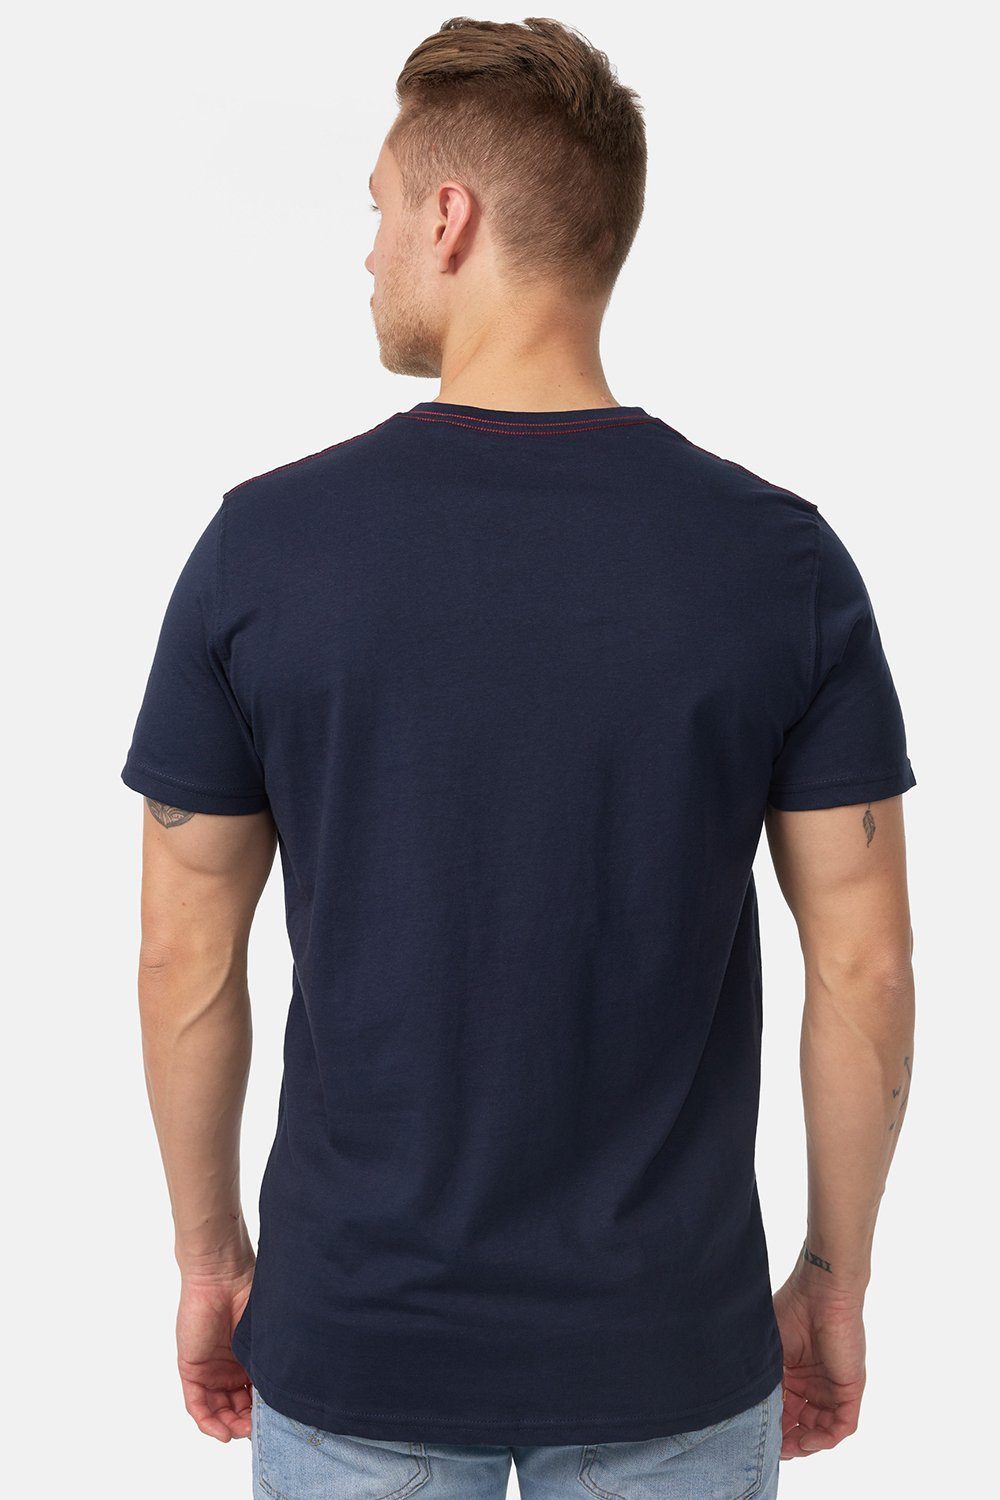 TWO TONE Lonsdale Navy T-Shirt